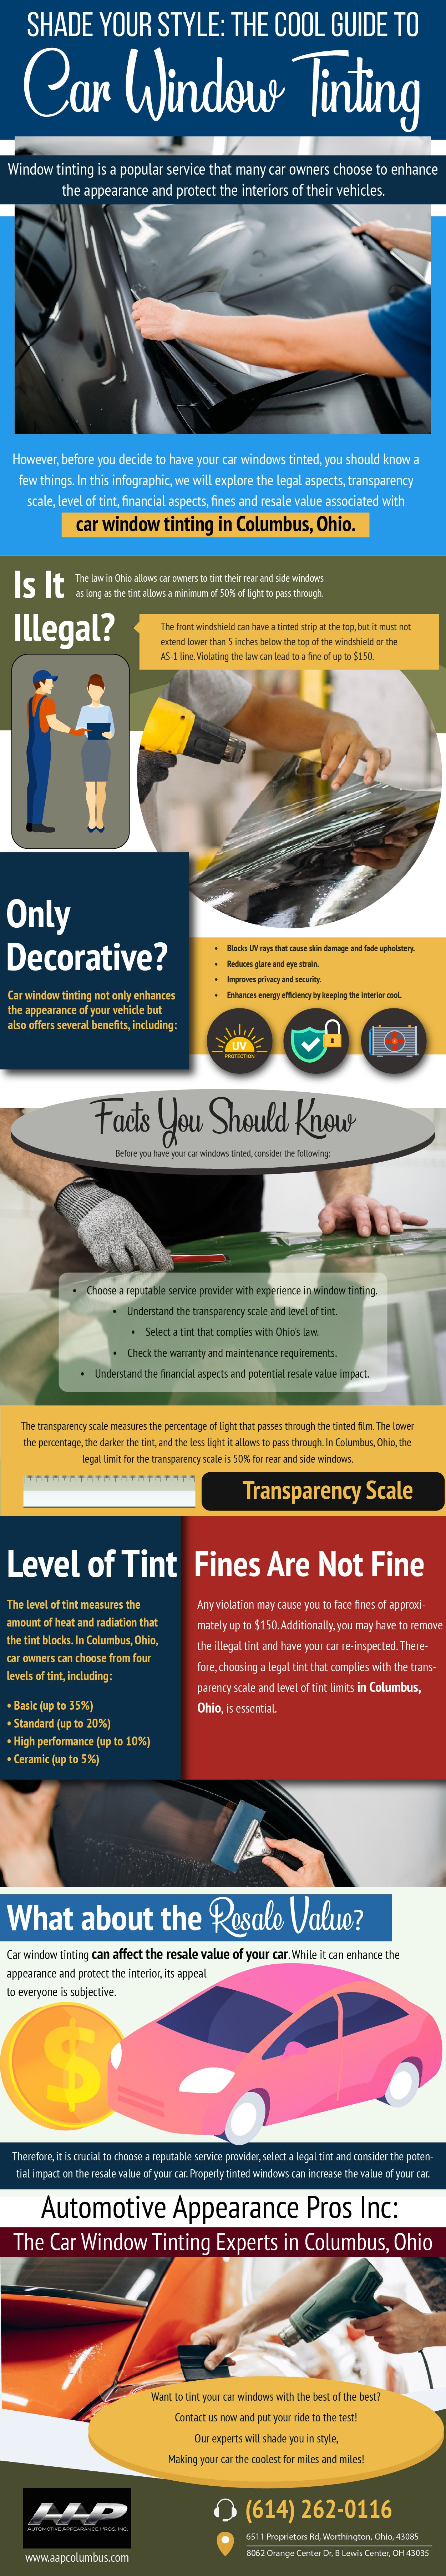 Factors to consider before buying a DIY Car Tint (Infographic